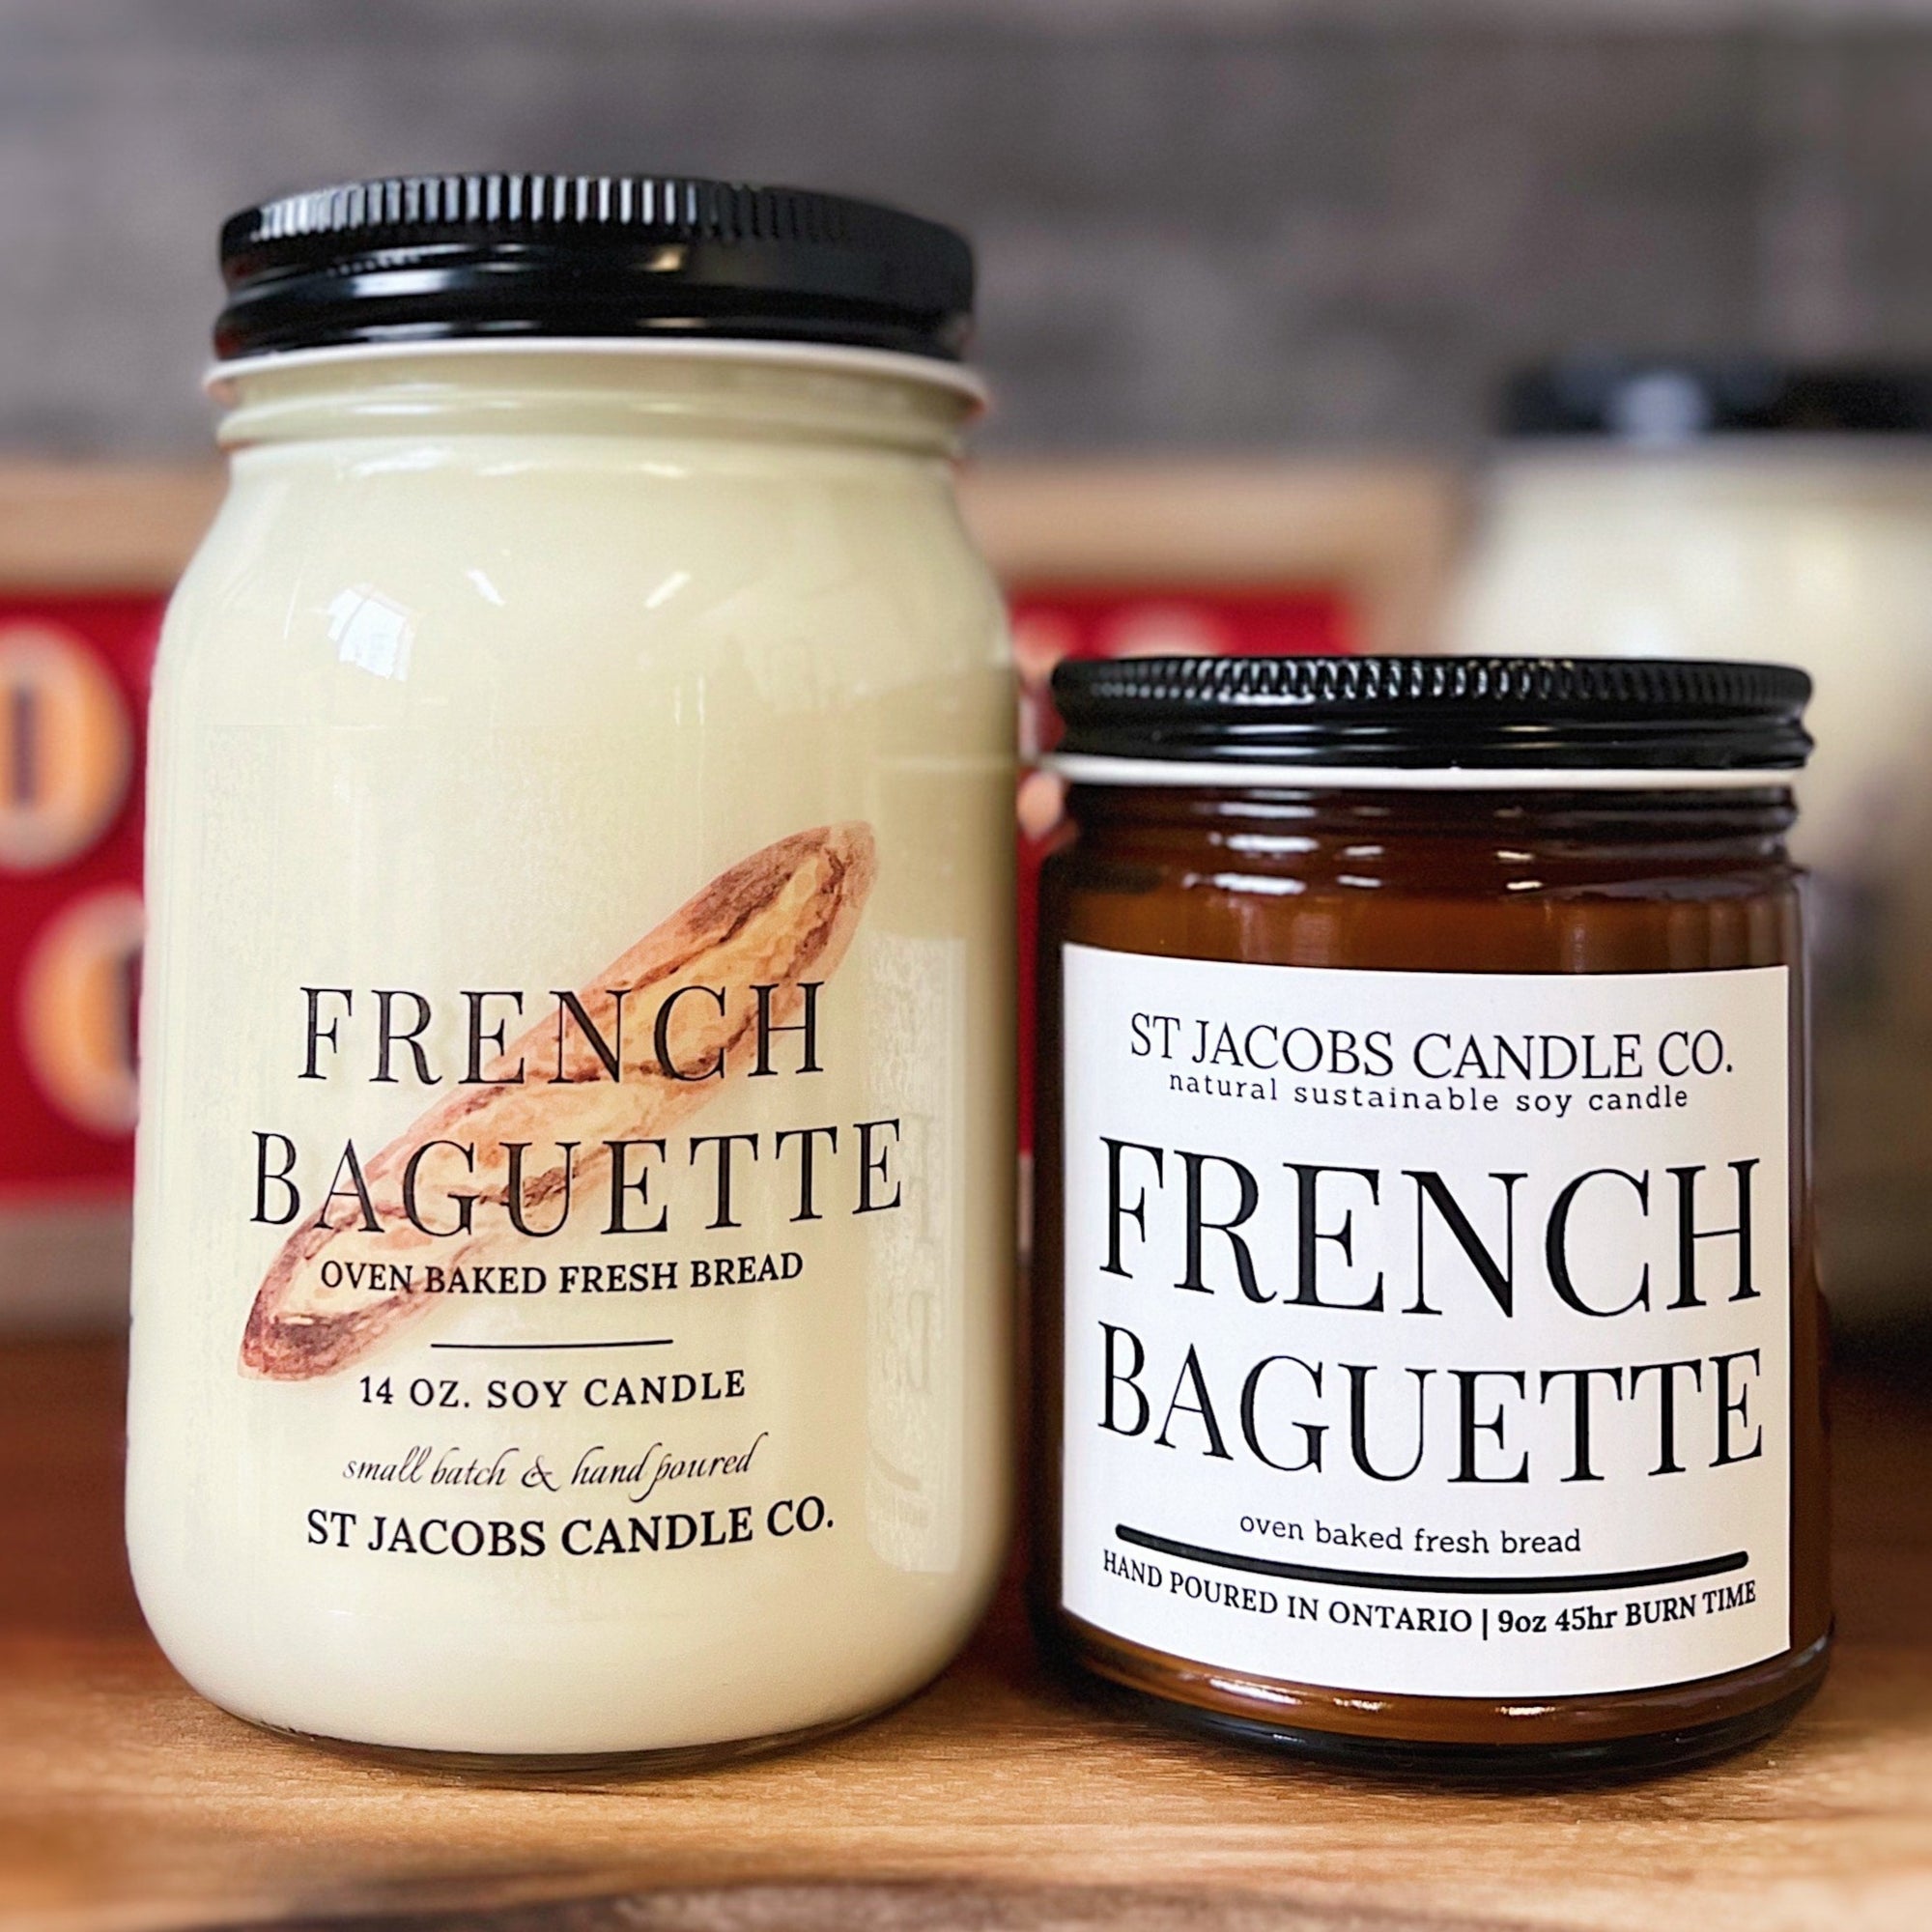 "FRENCH BAGUETTE" Natural Soy Candle